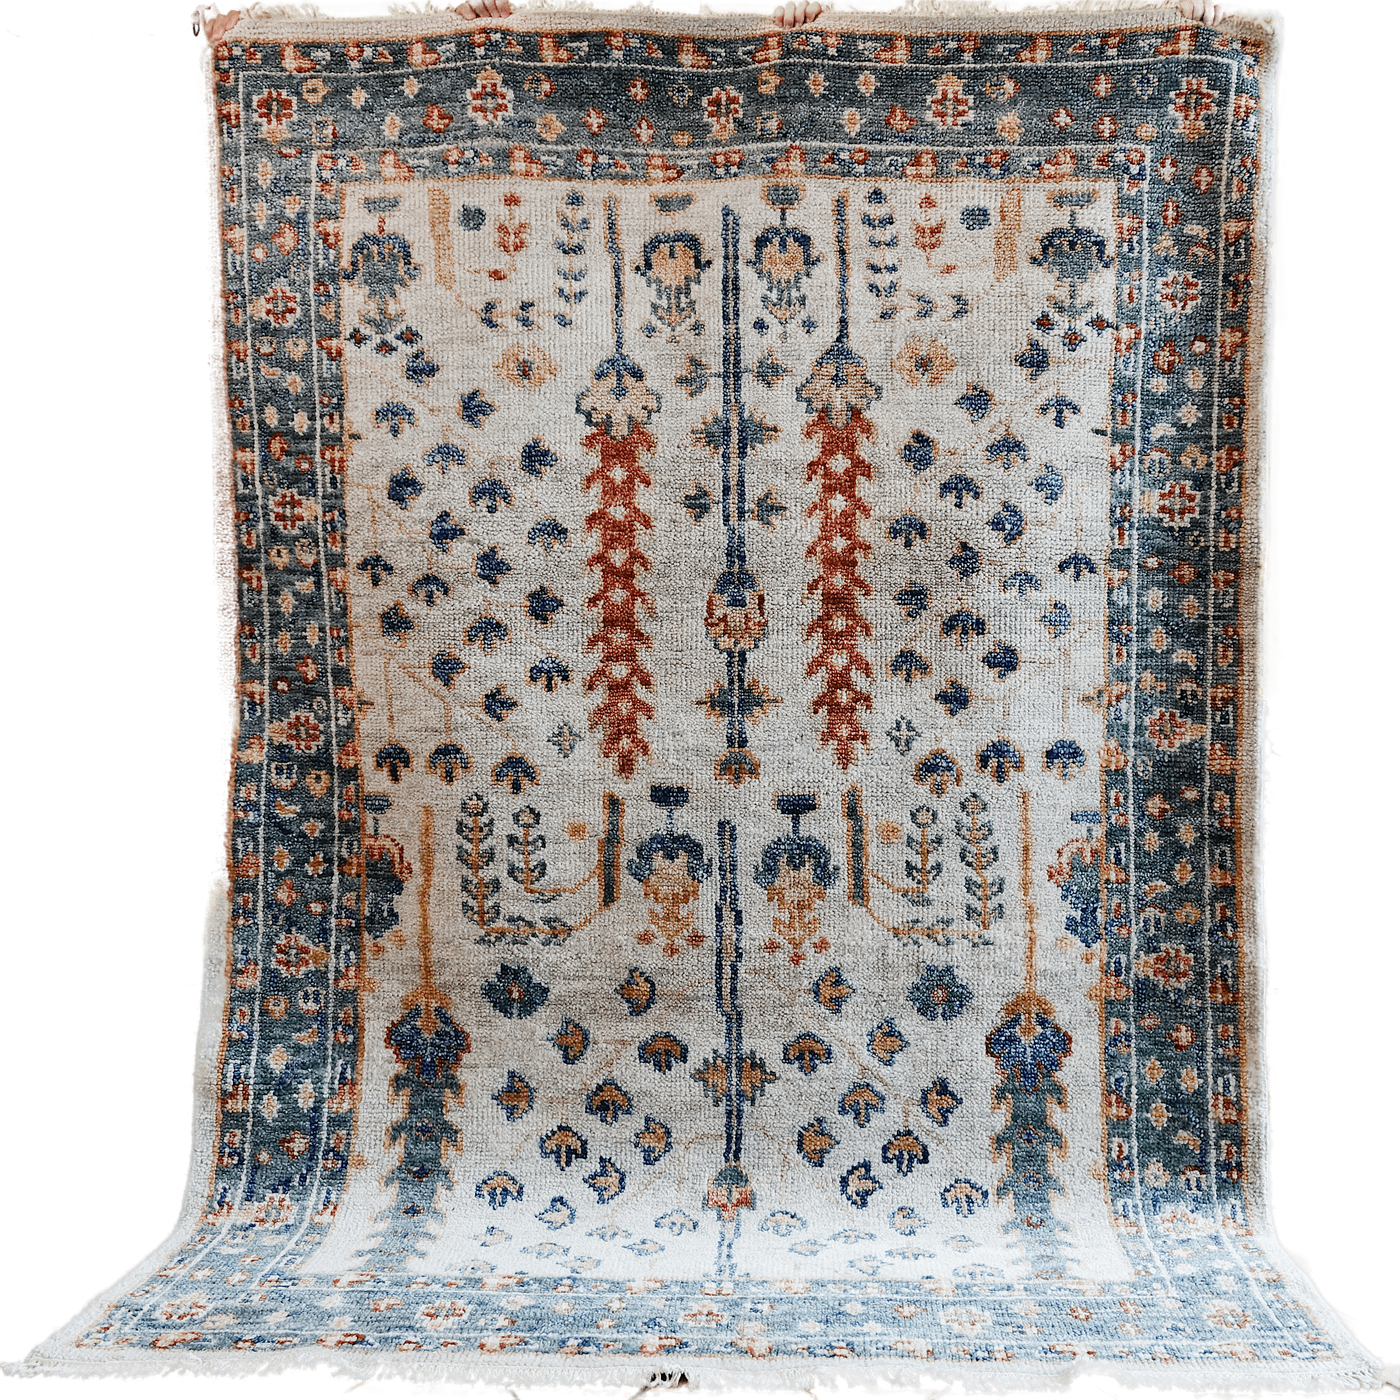 Araji - Indian carpet knotted in wool